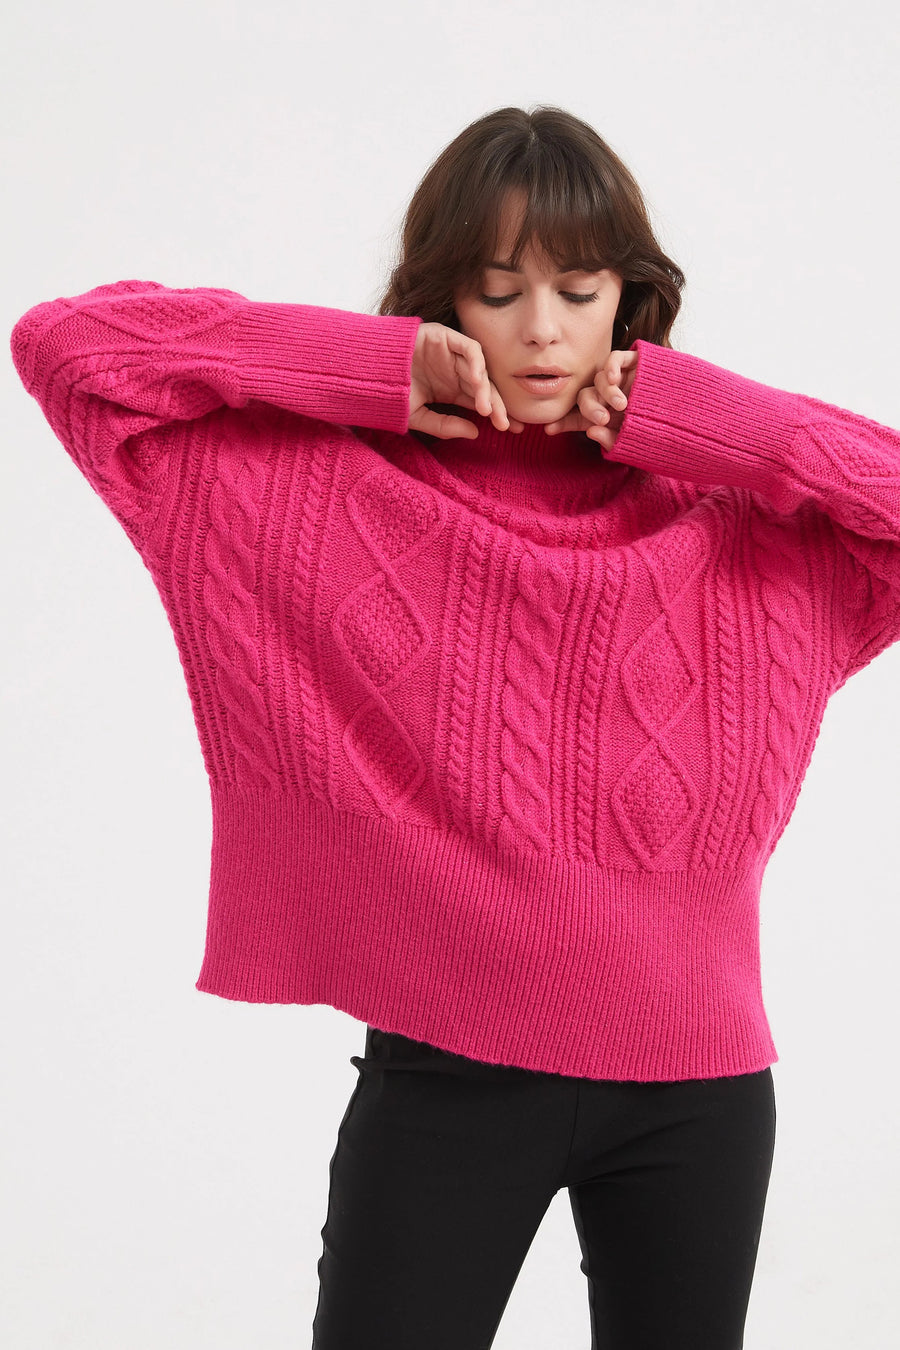 Classic Cable Turtle Neck Knit Hot Pink - Kohl and Soda